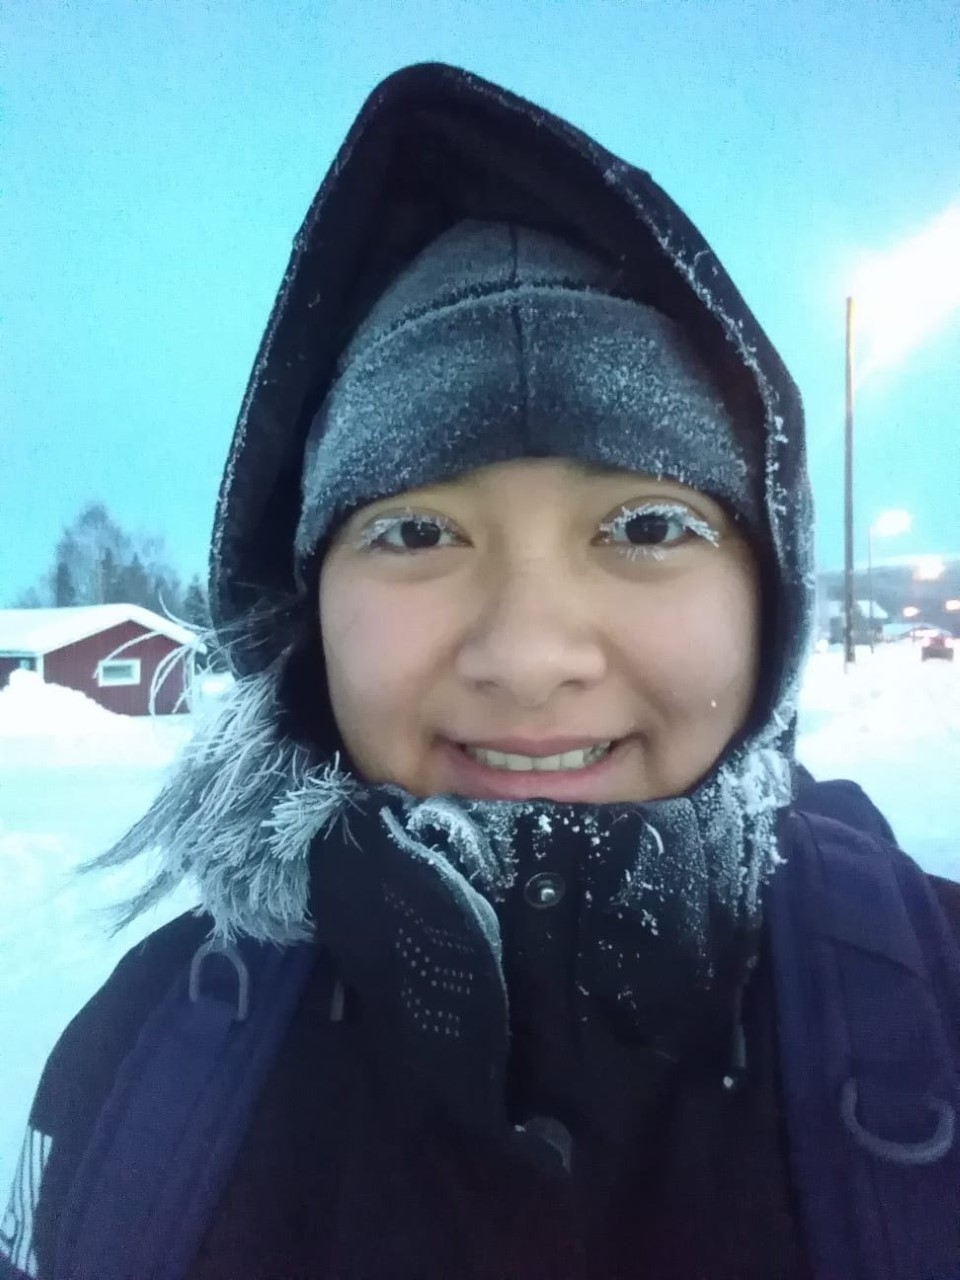 A young woman in winter clothing smiles at the camera, her face covered in frozen snow.